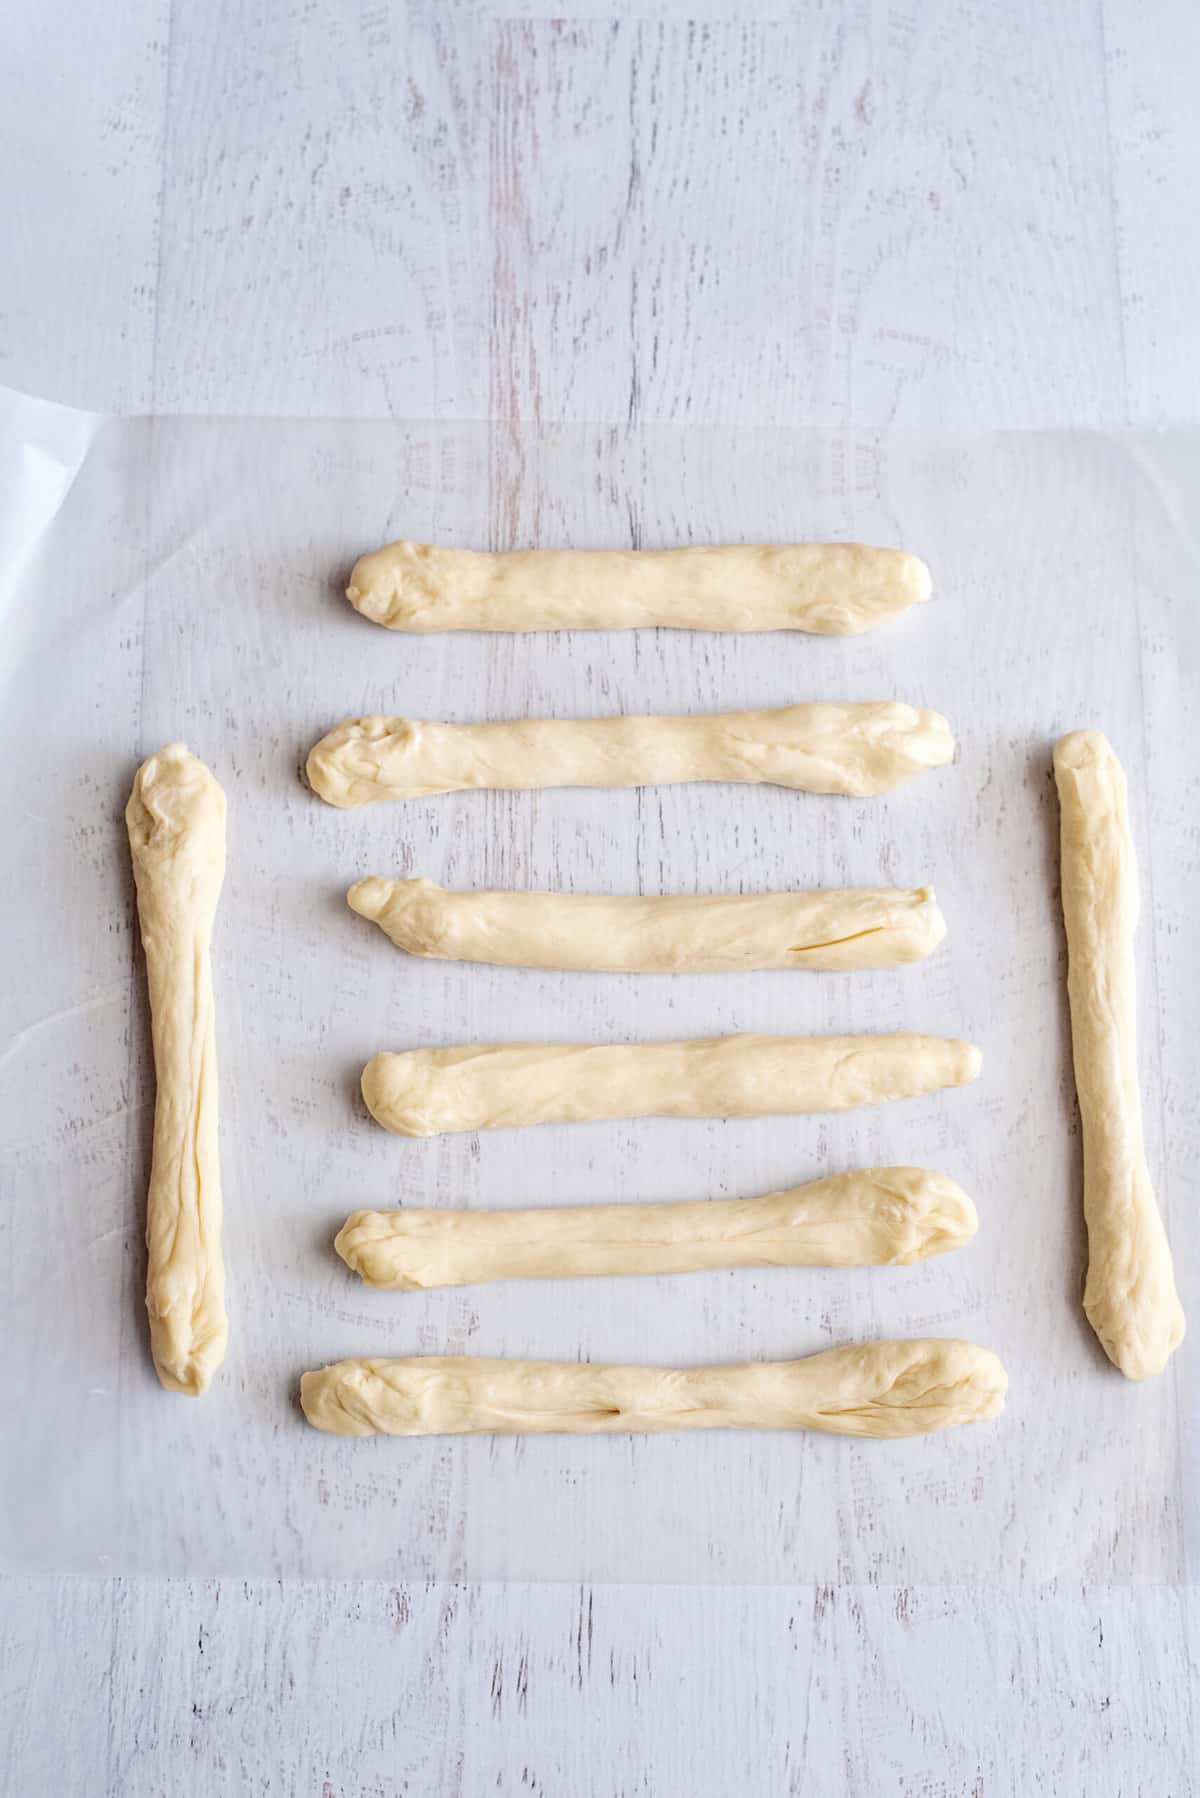 roll dough into 6-inch tubes